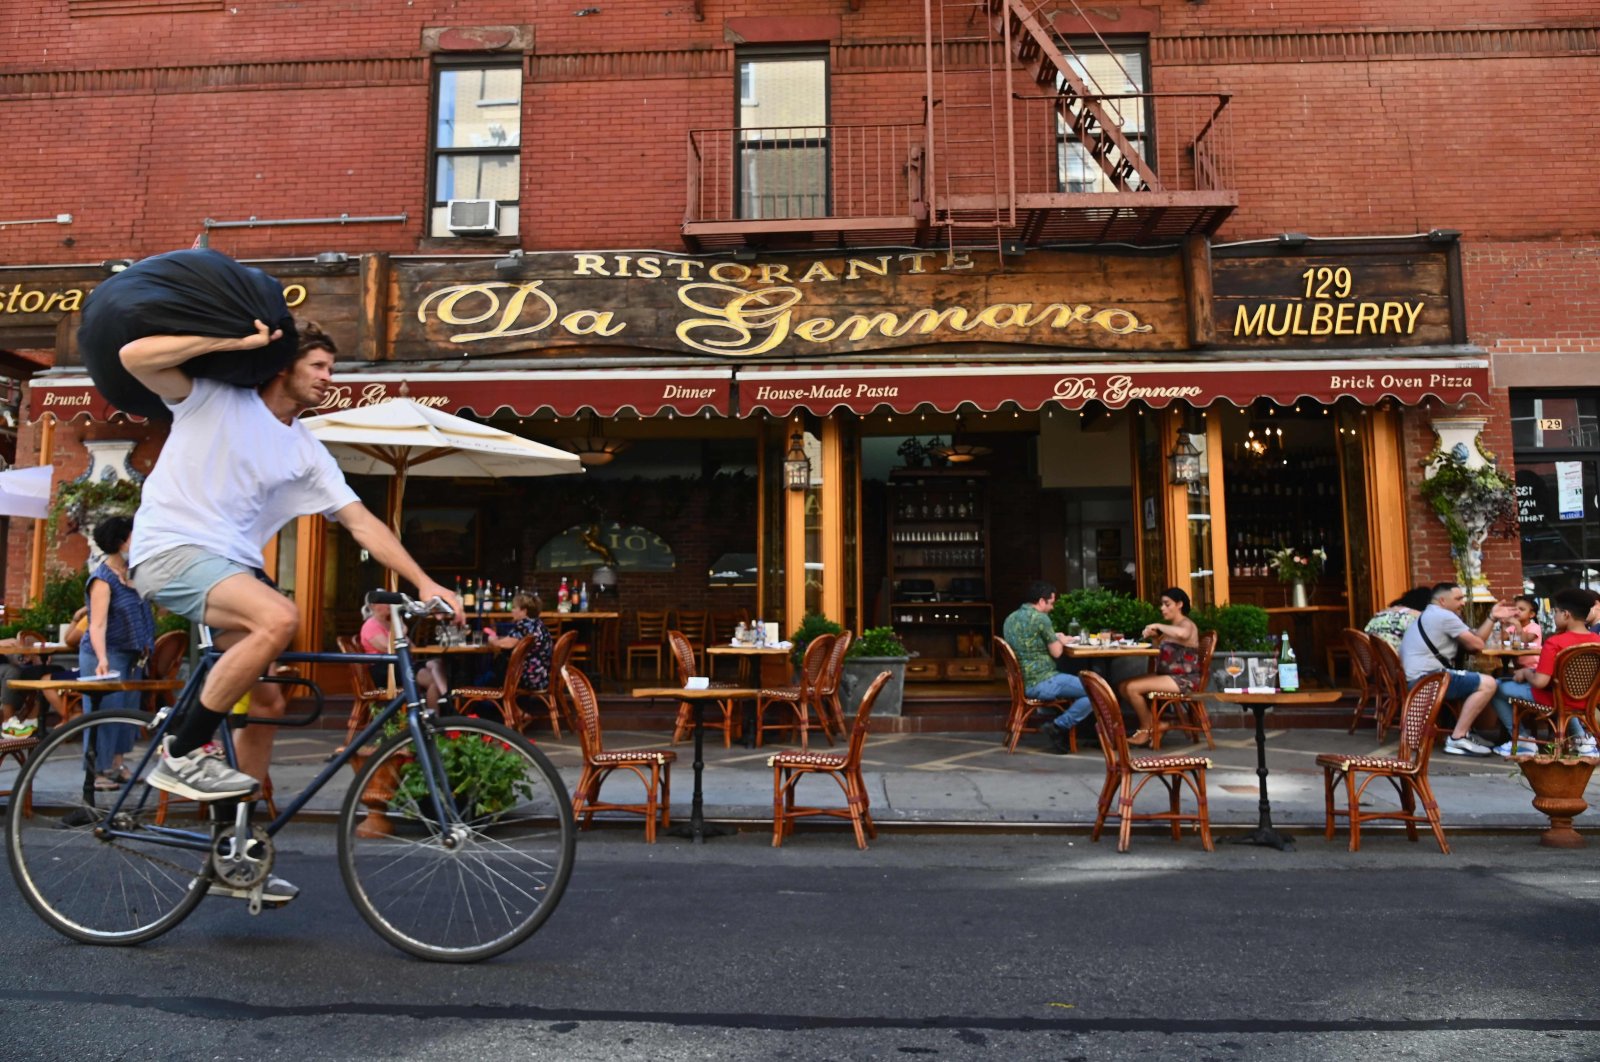 A biker goes past a restaurant with outdoor seating in the Little Italy neighborhood, New York City, June 24, 2020. (AFP Photo)